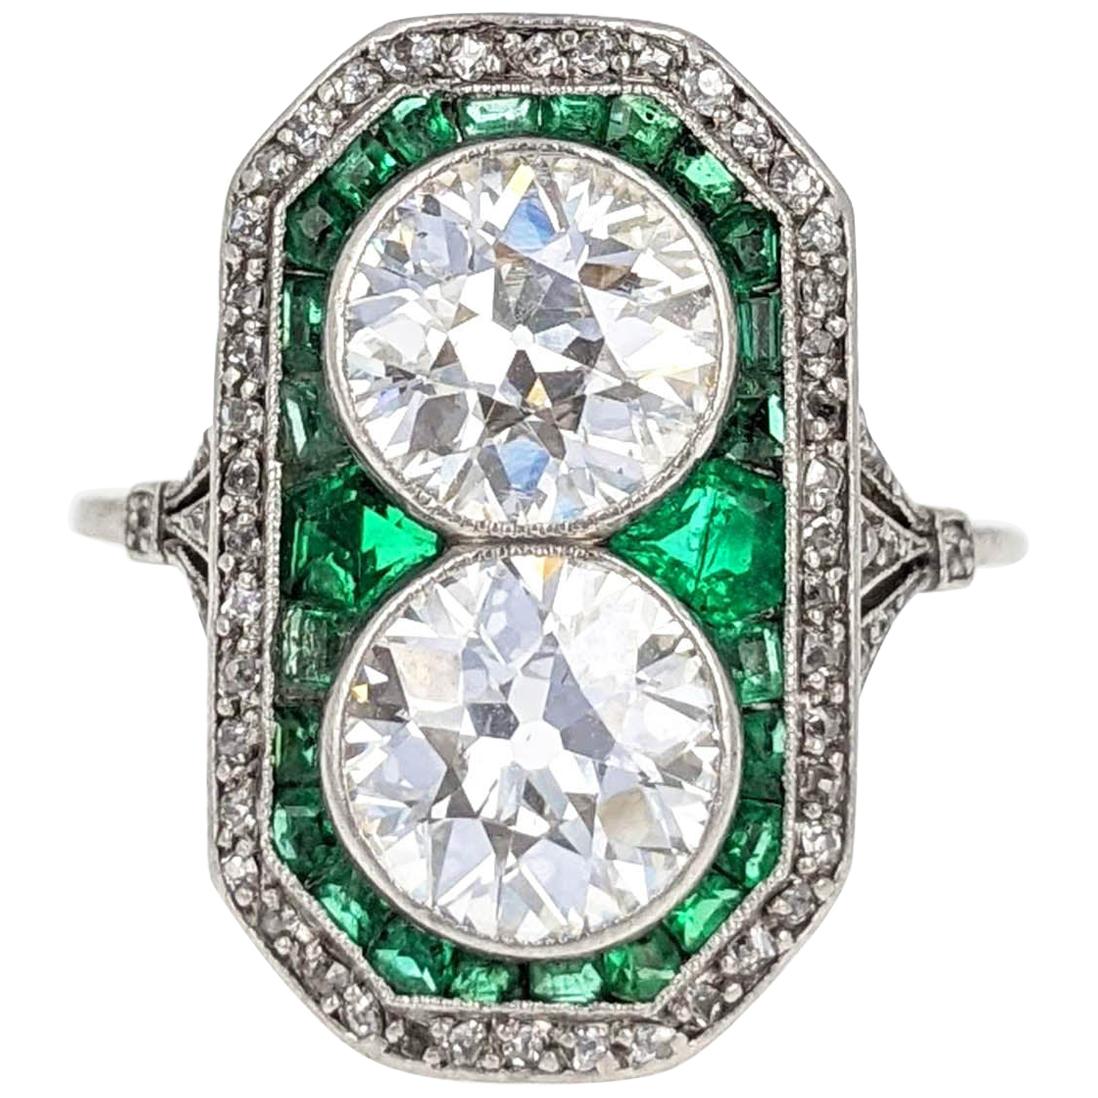 Belle Époque Old European Cut Diamond Emerald and Platinum French Ring